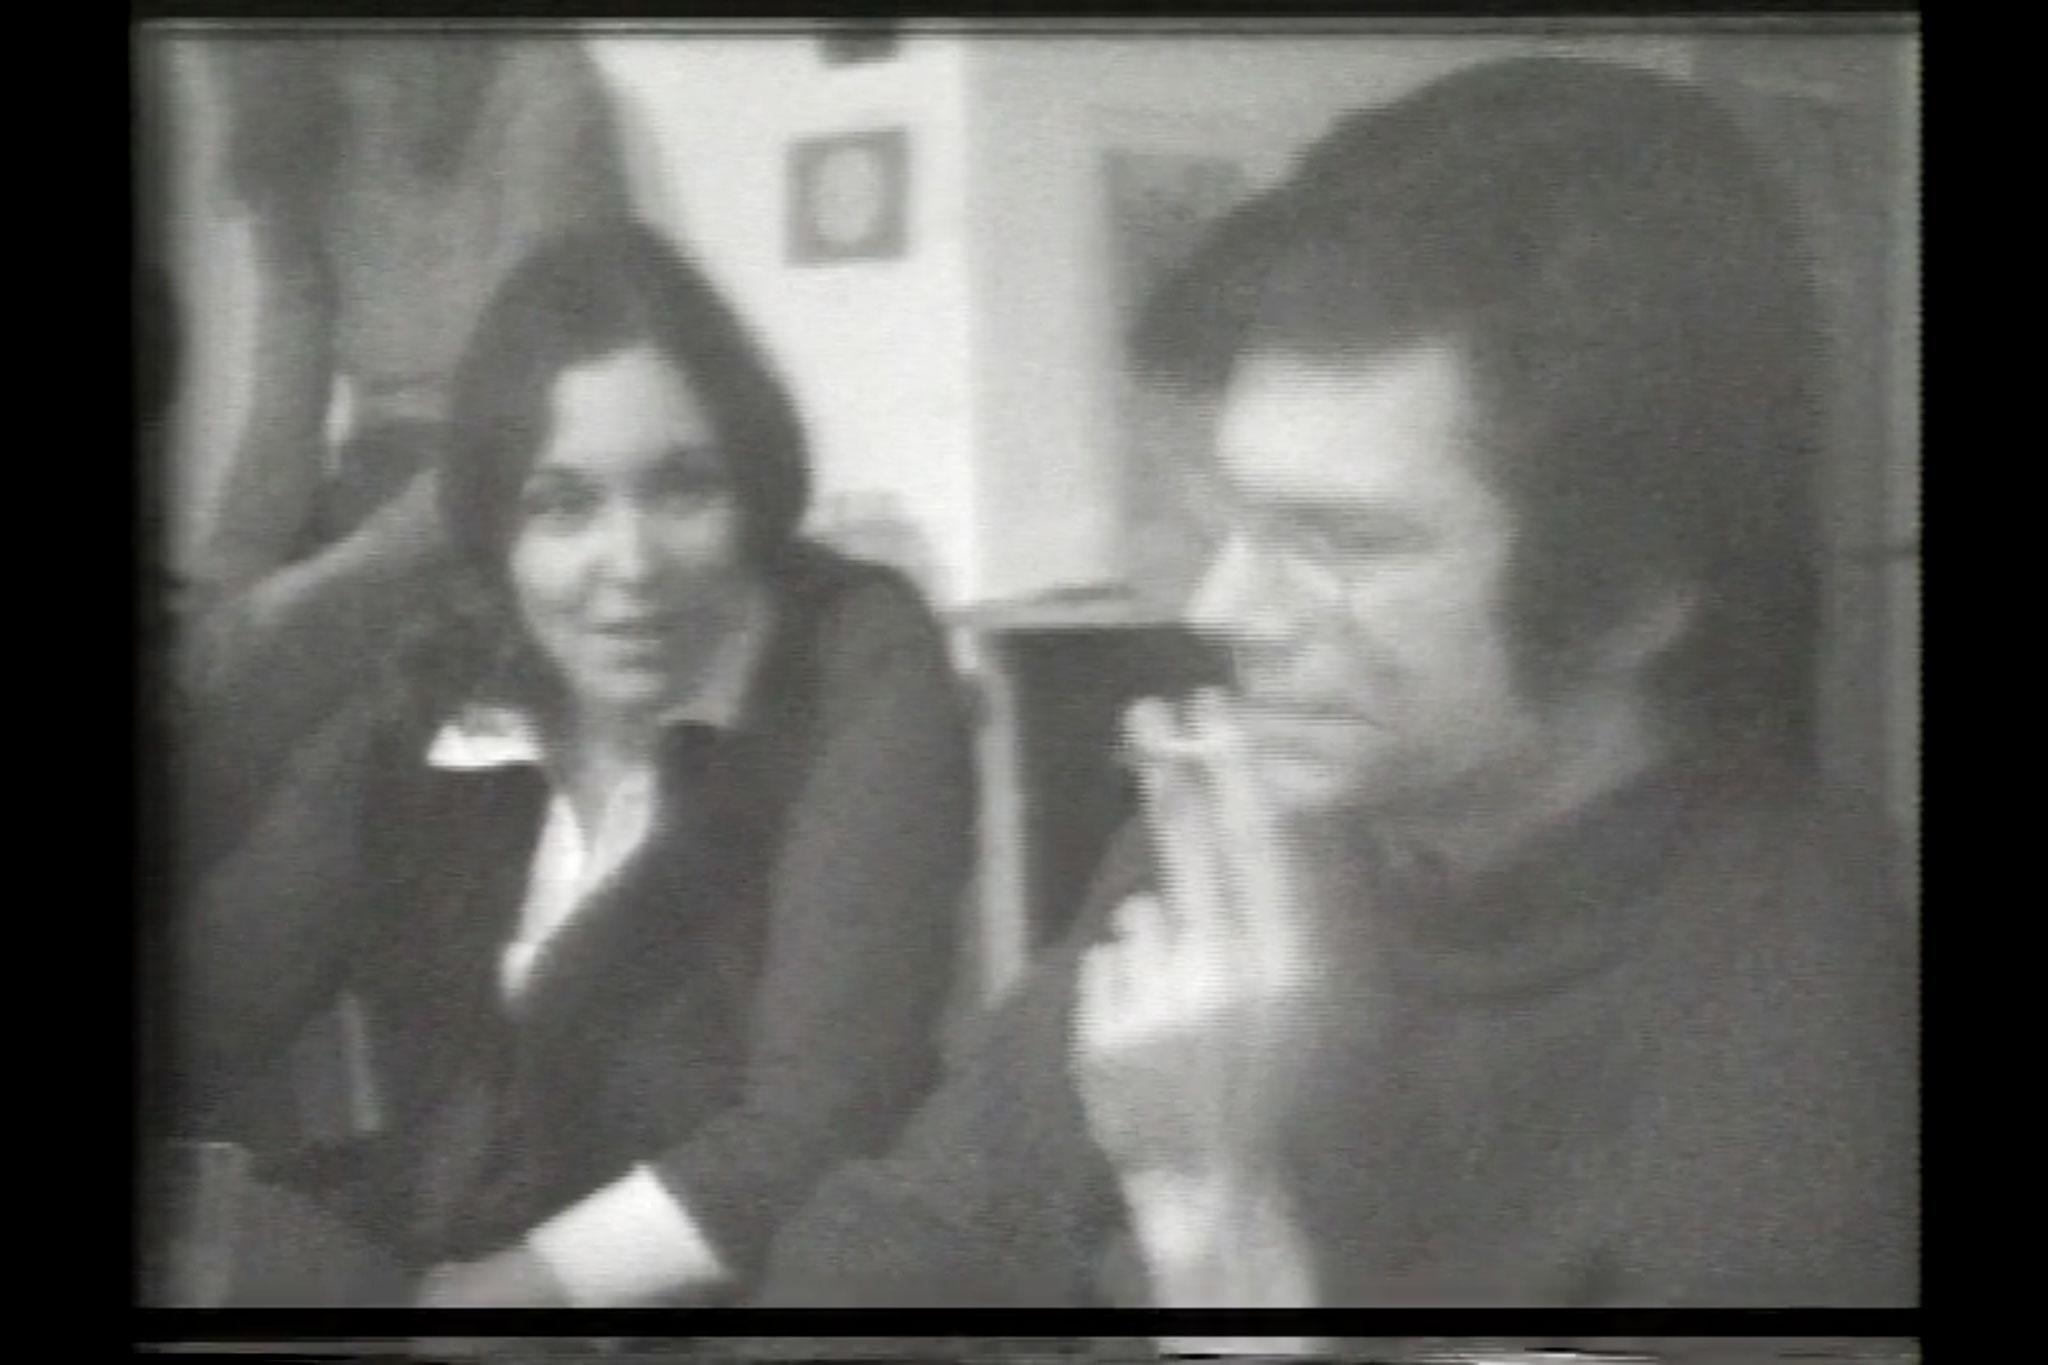 Black and white, a young woman and man seated next to each other in conversation.